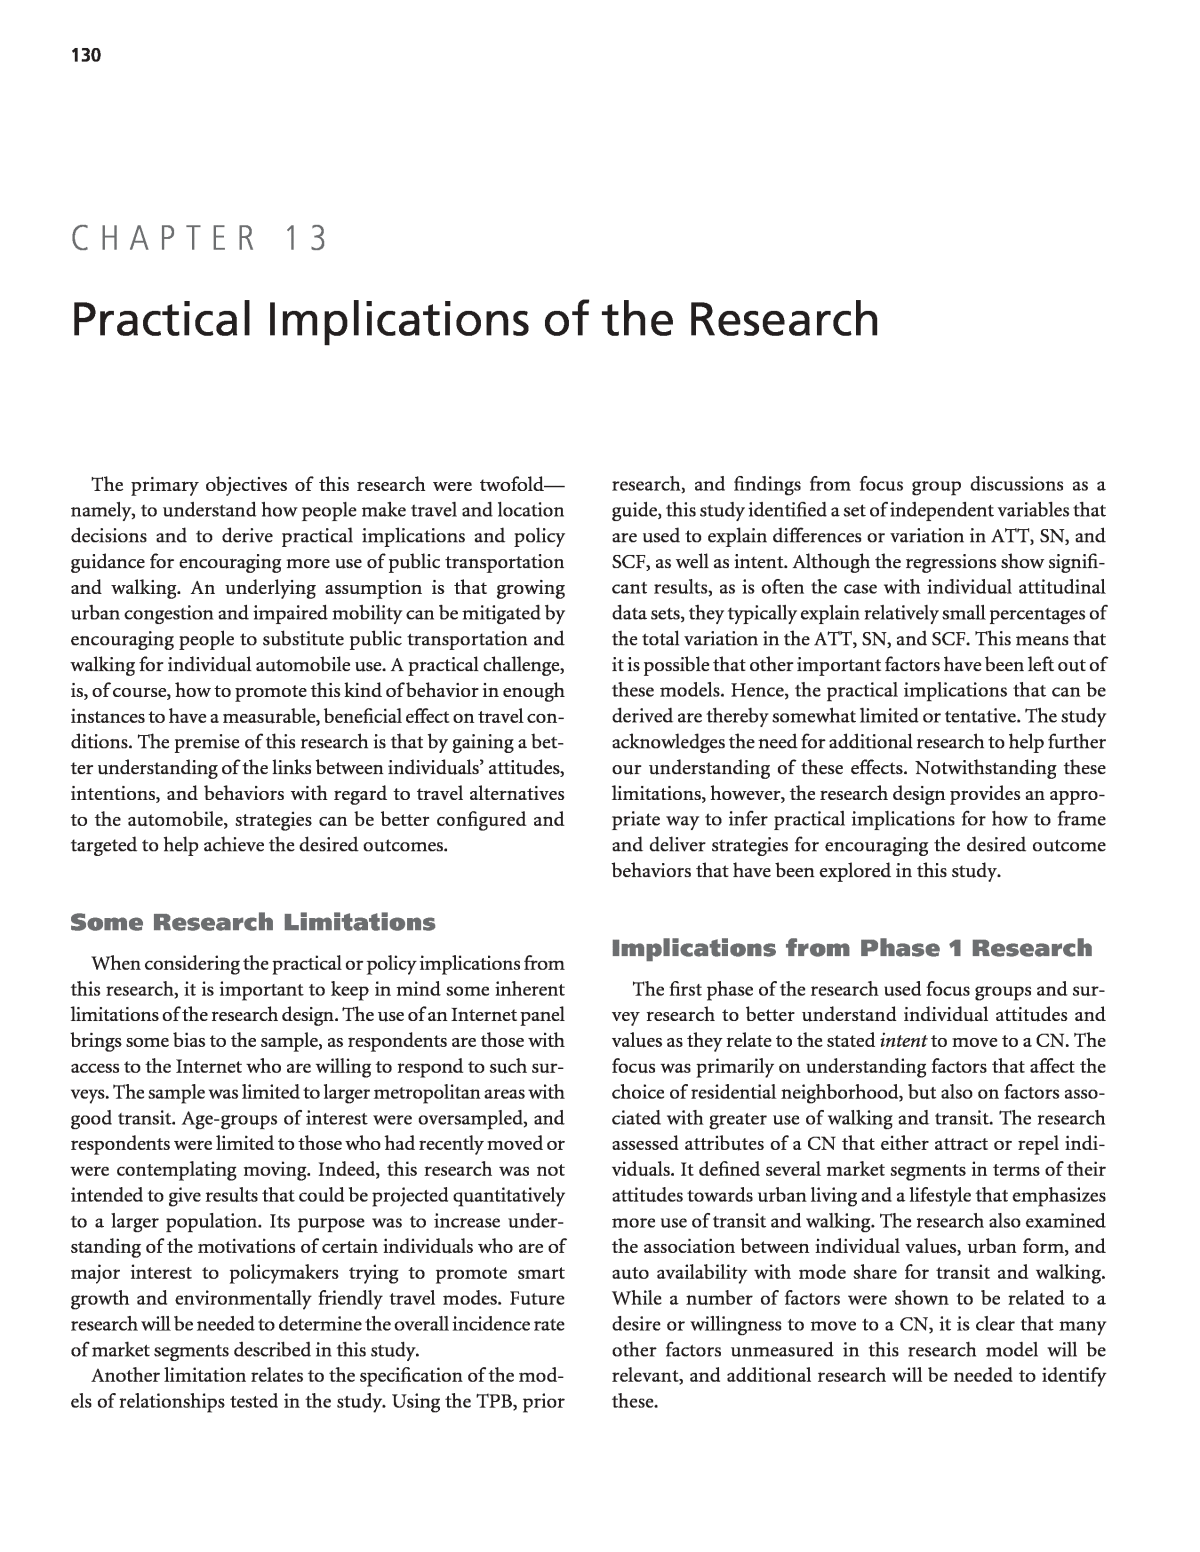 Chapter 16 - Practical Implications of the Research